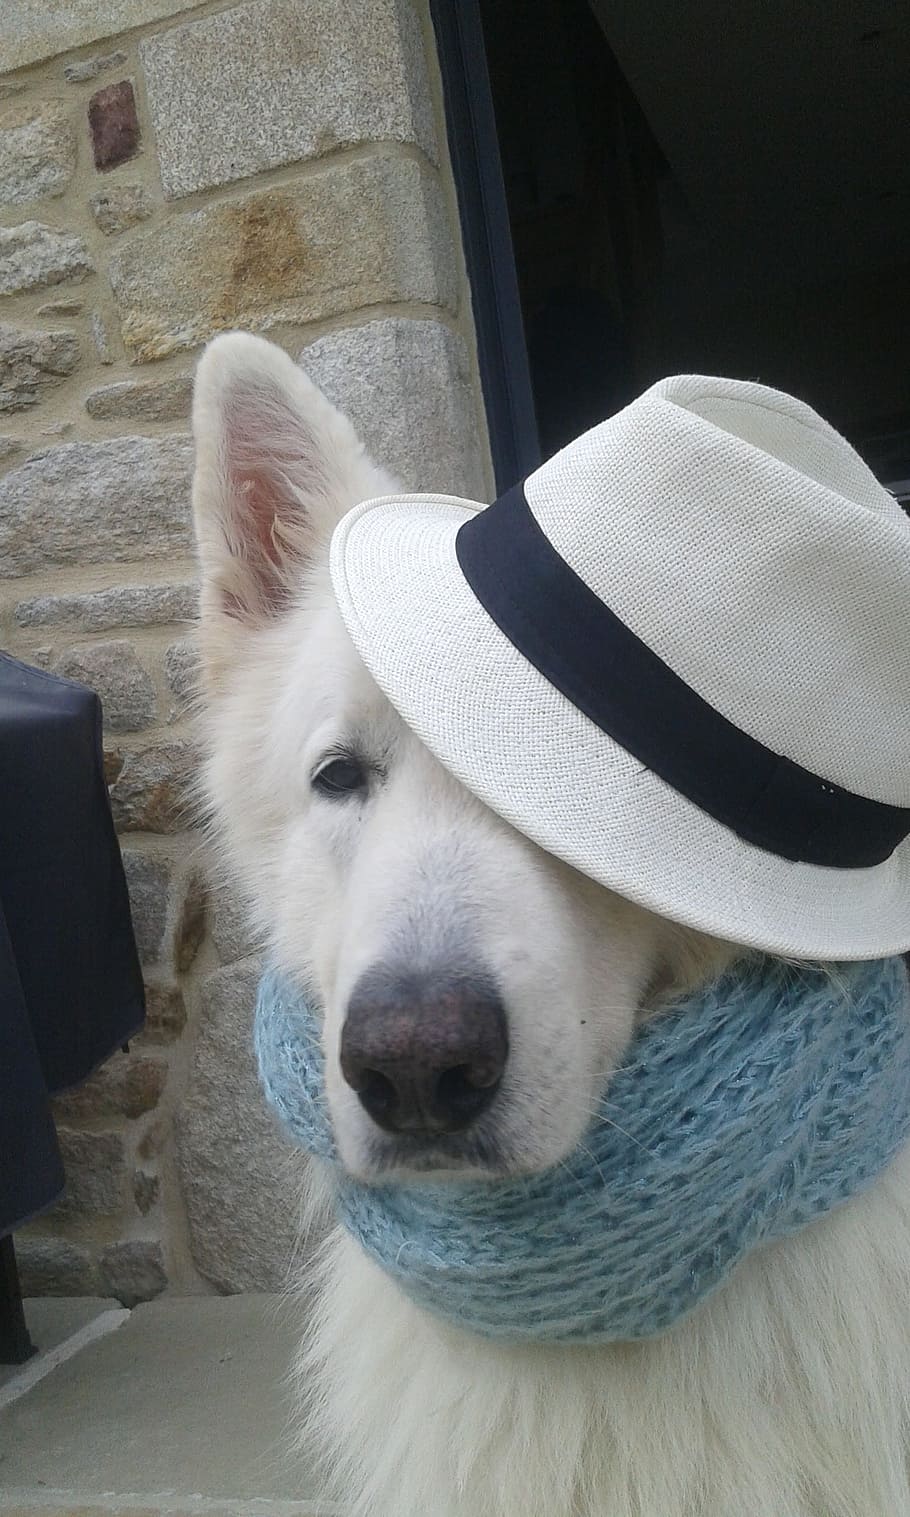 swiss white shepherd, dog in disguise, dog, animals, i wanted to live with animals, one animal, mammal, domestic animals, pets, domestic